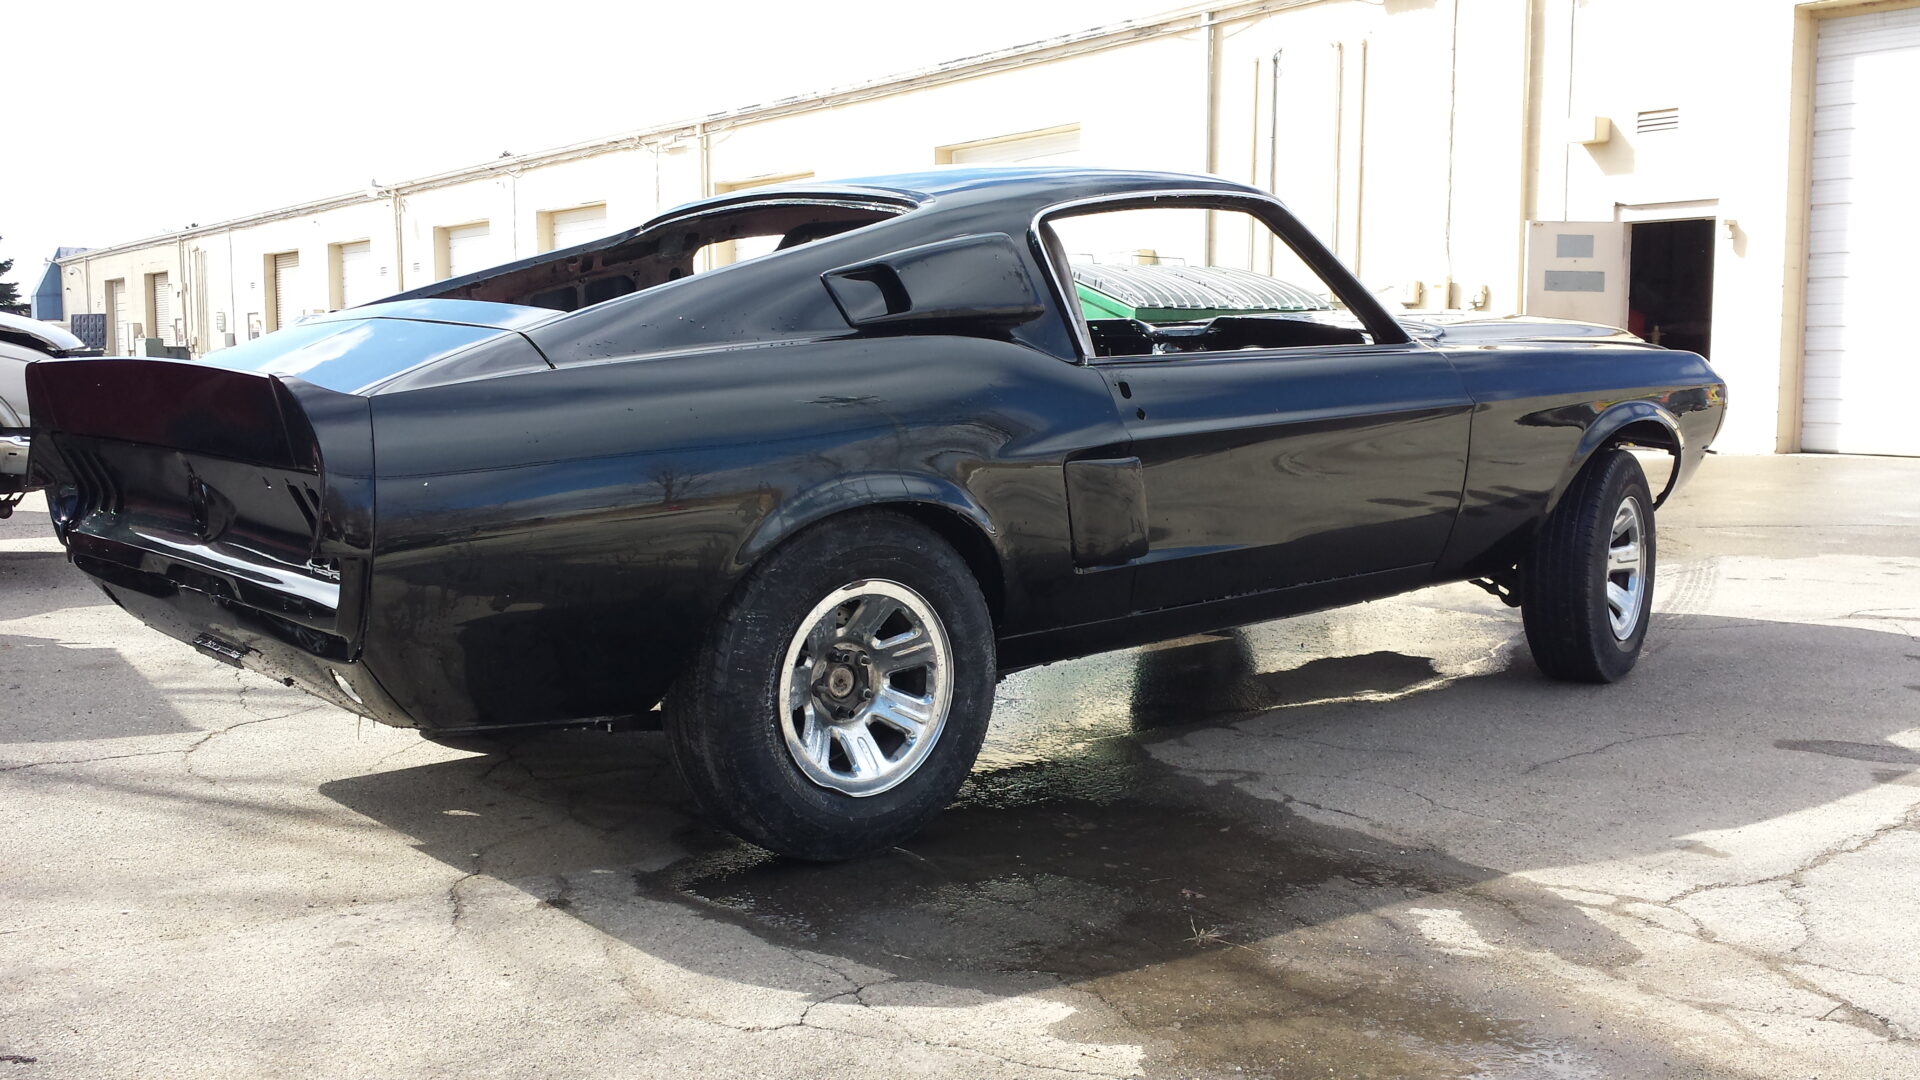 A black 1967 Ford Mustang Fastback